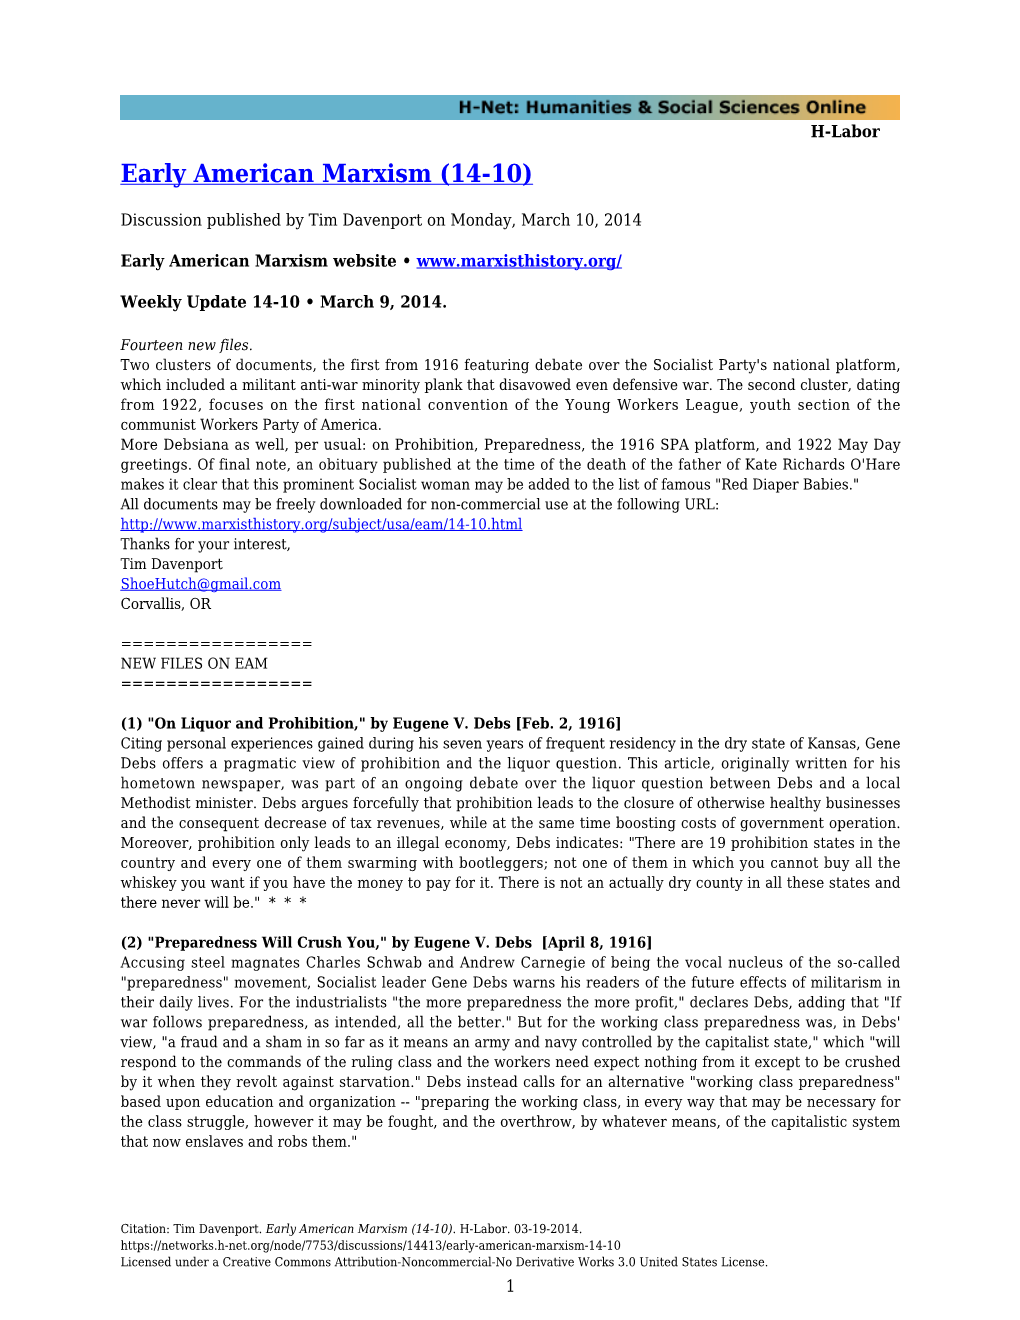 Early American Marxism (14-10)